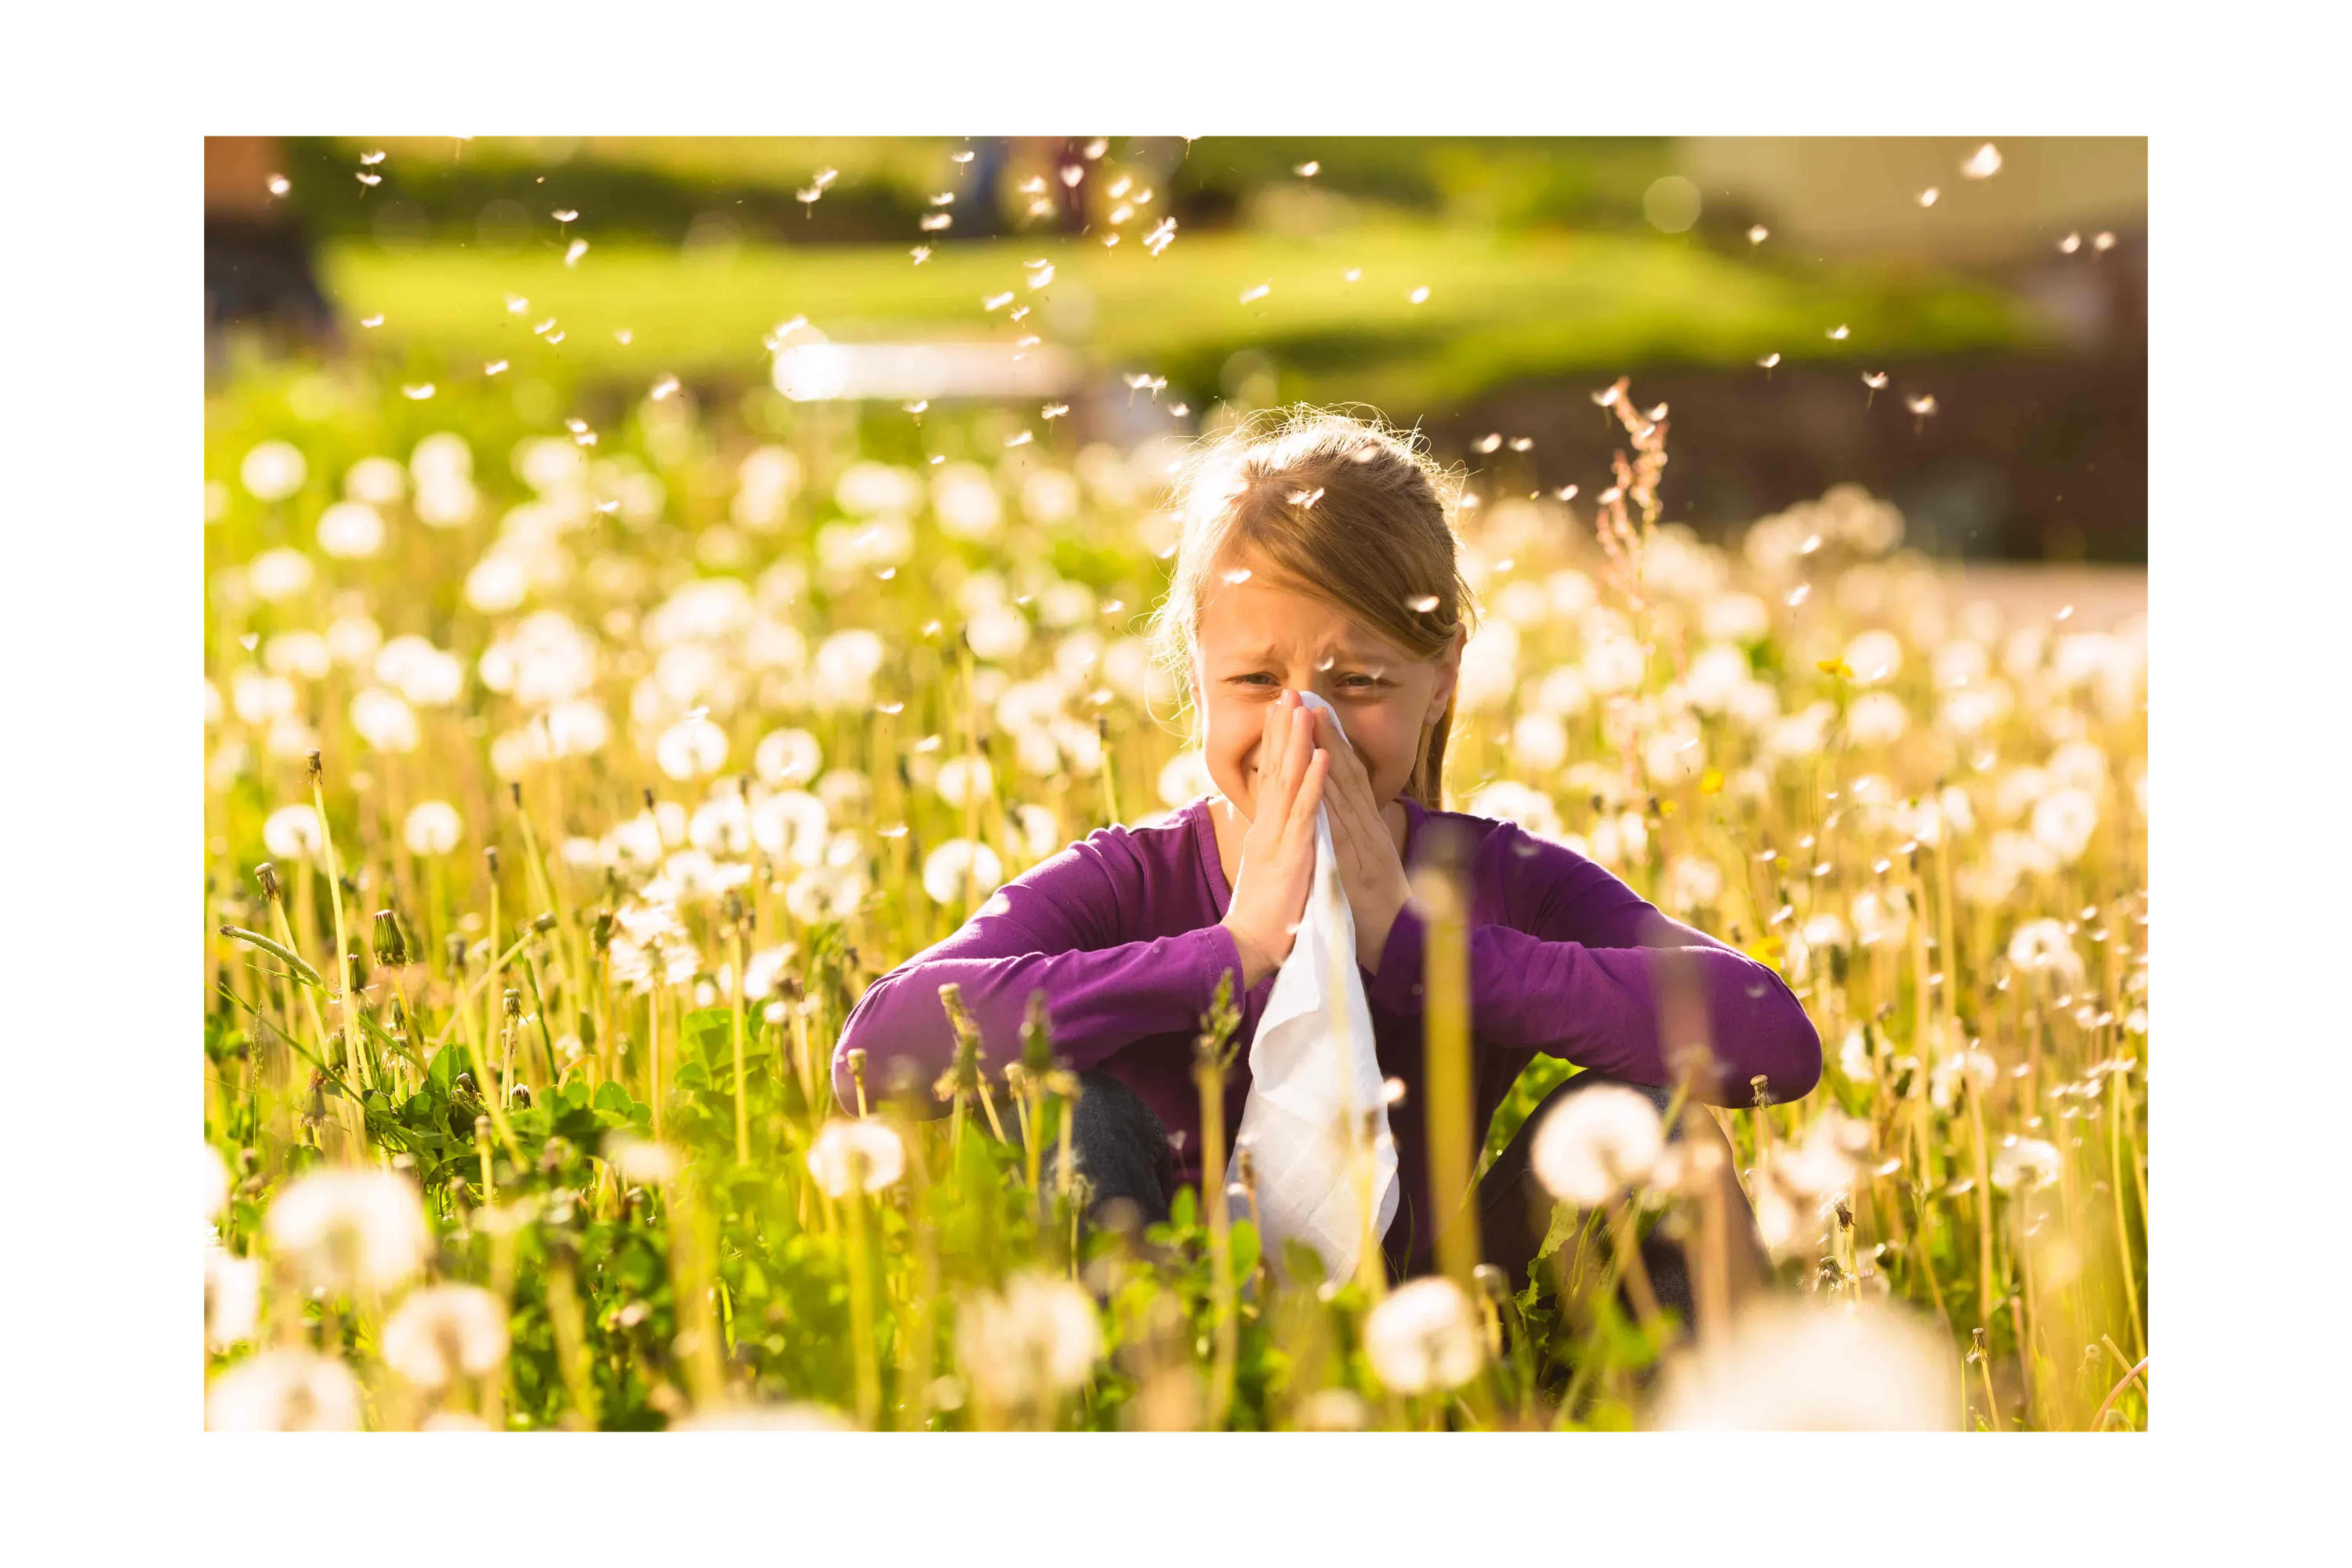 child sitting in a field of dandelions holding a tissue to her nose